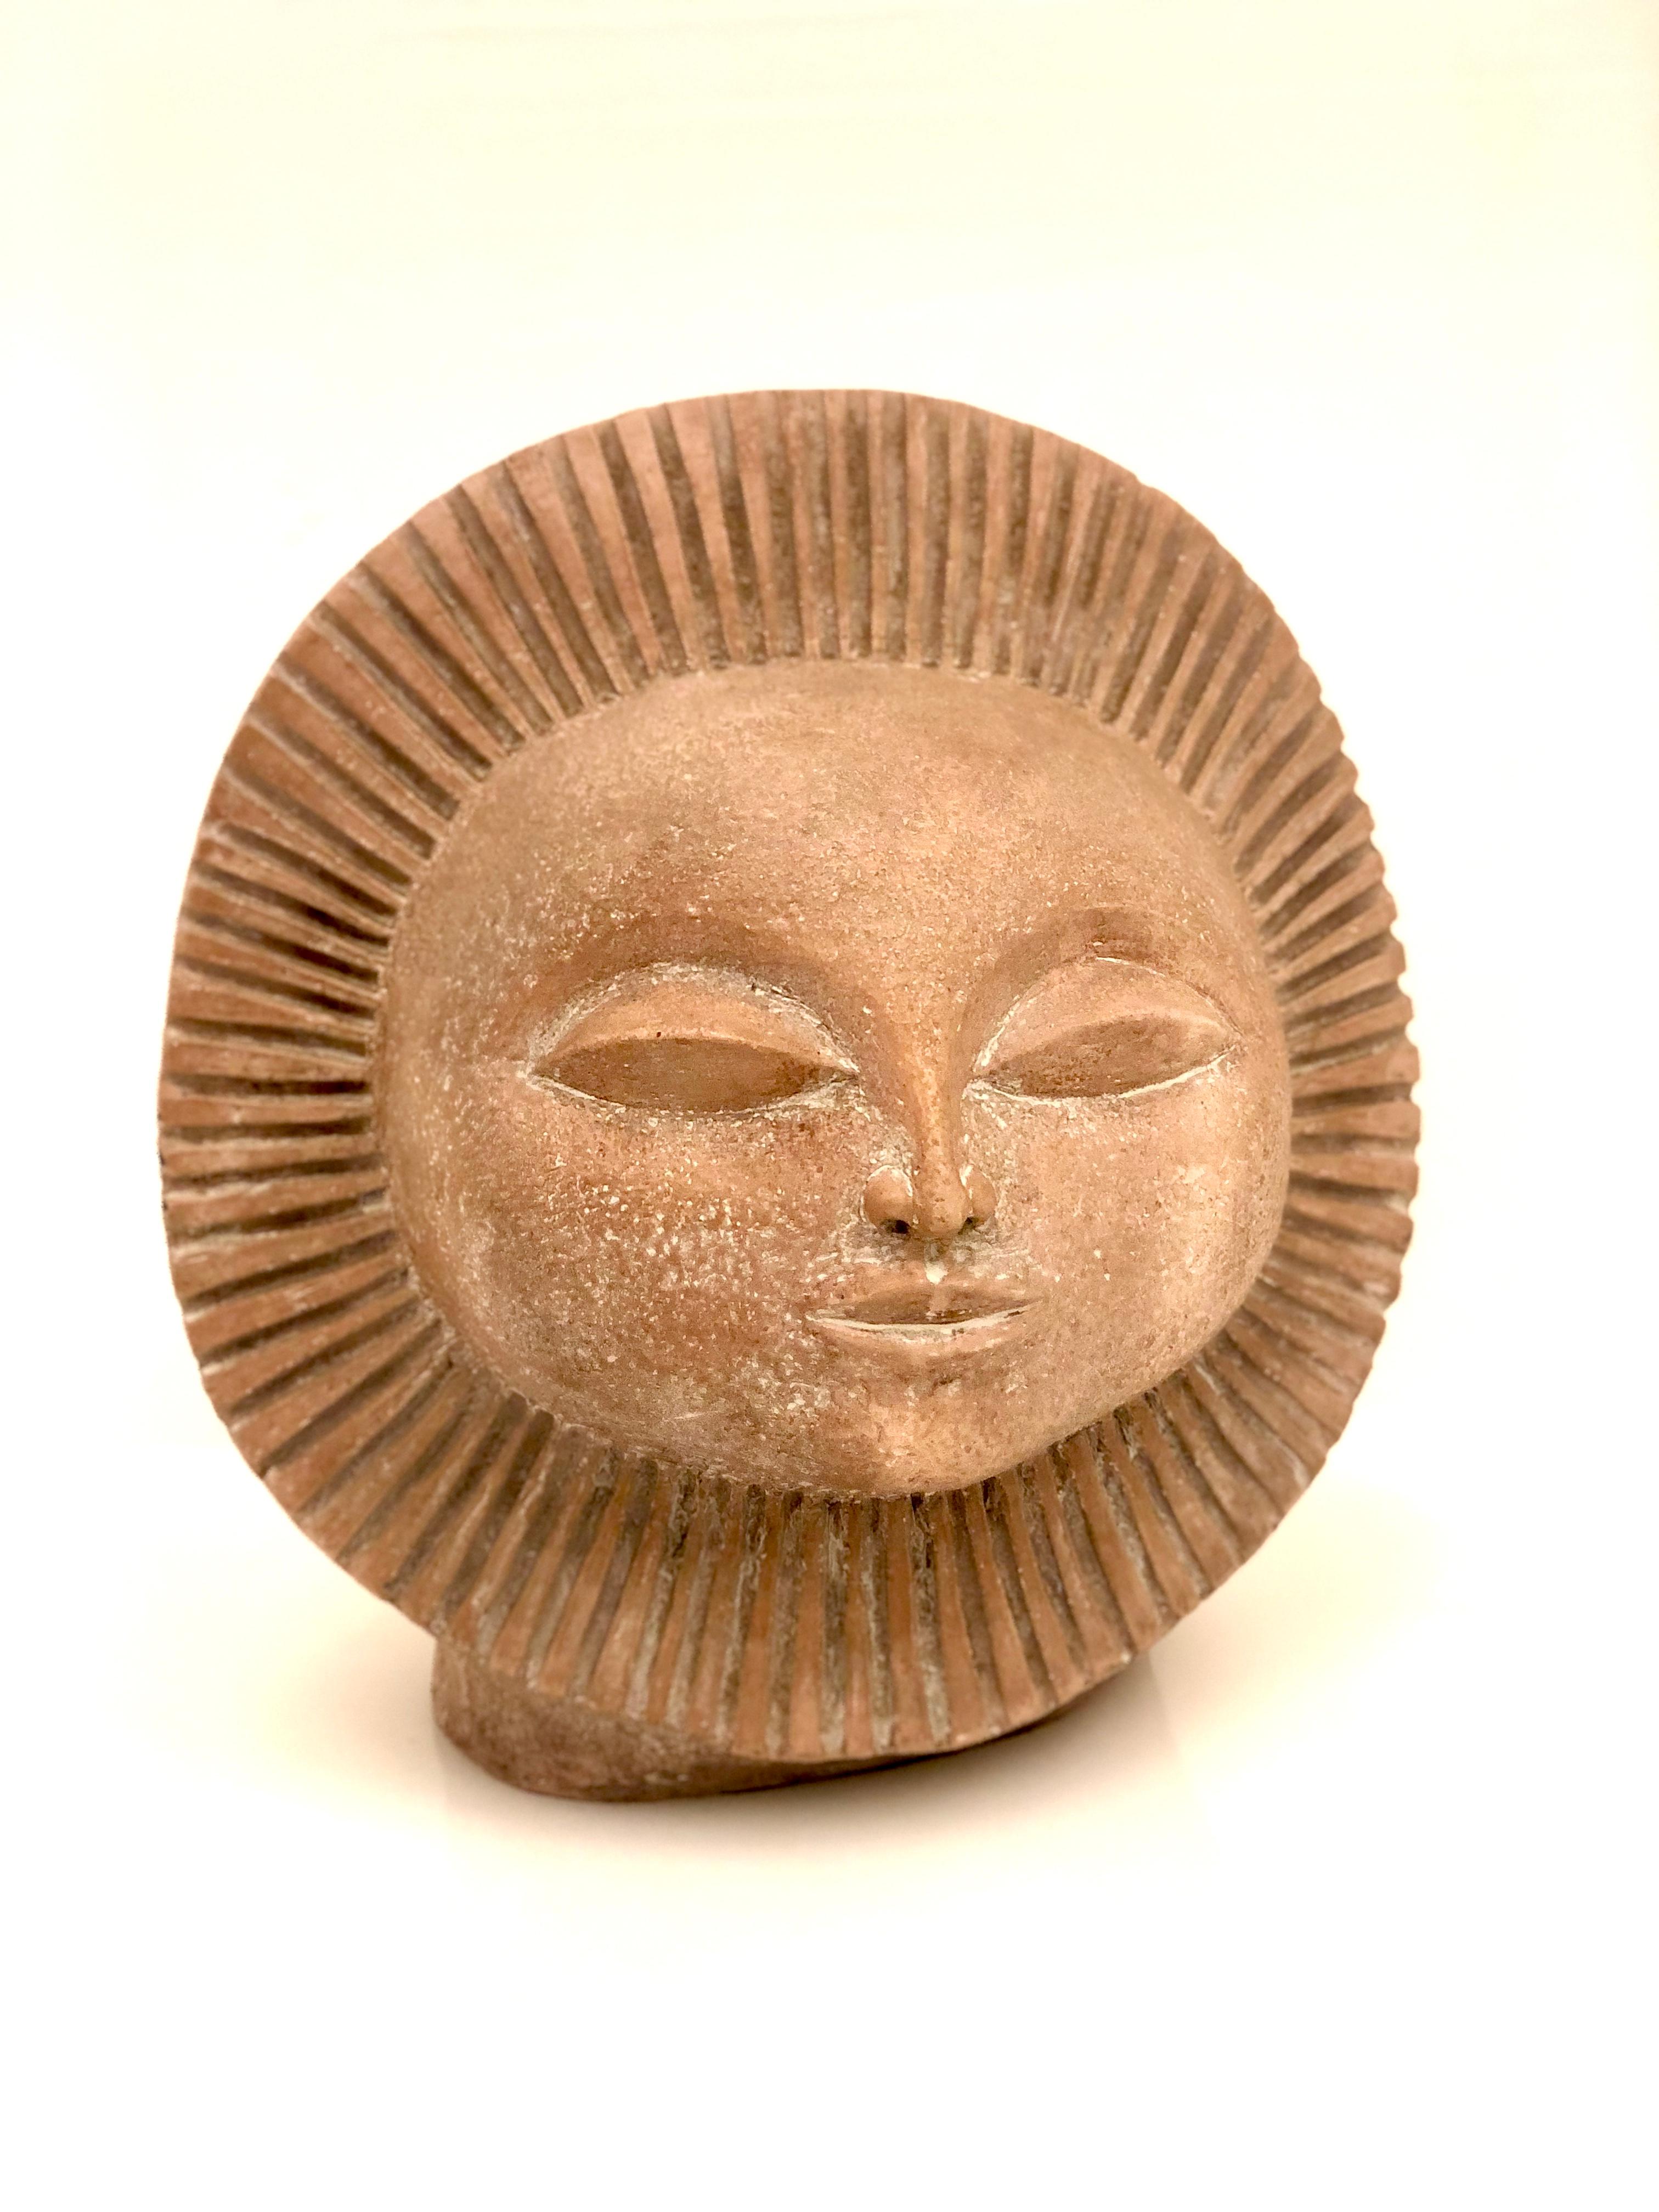 Plaster ceramic sculpture finished in terracotta tone by Paul Bellardo for Austin Productions. Stamped with 1968 date.
 